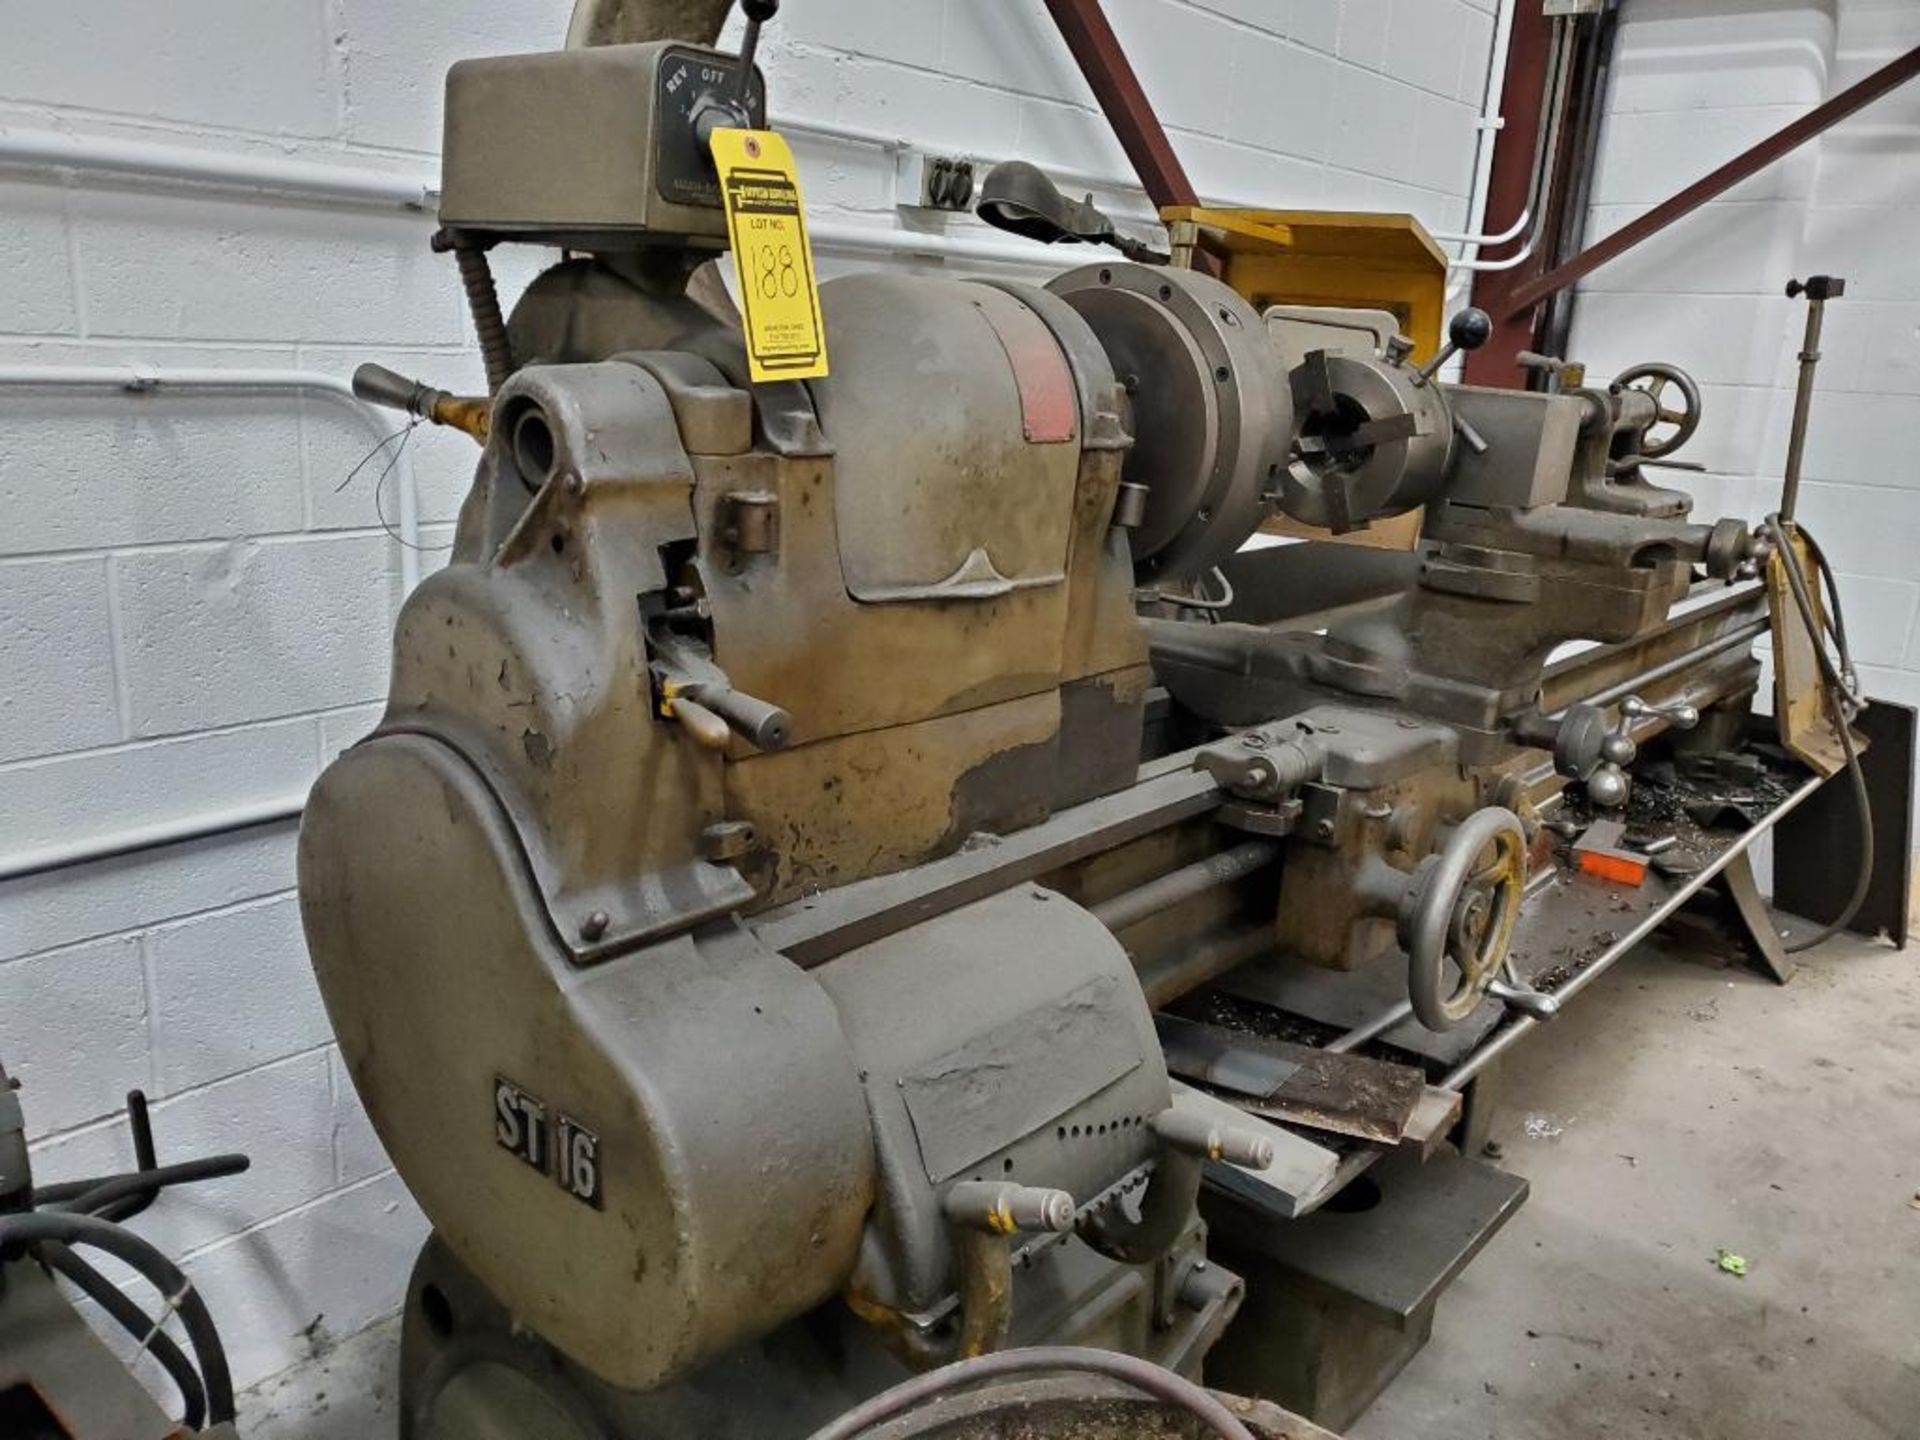 South Bend Horizontal Engine Lathe, 8' Gap Bed, 12" 3-Jaw Chuck, Tailstock, Cross Slide, Toolpost w/ - Image 5 of 11